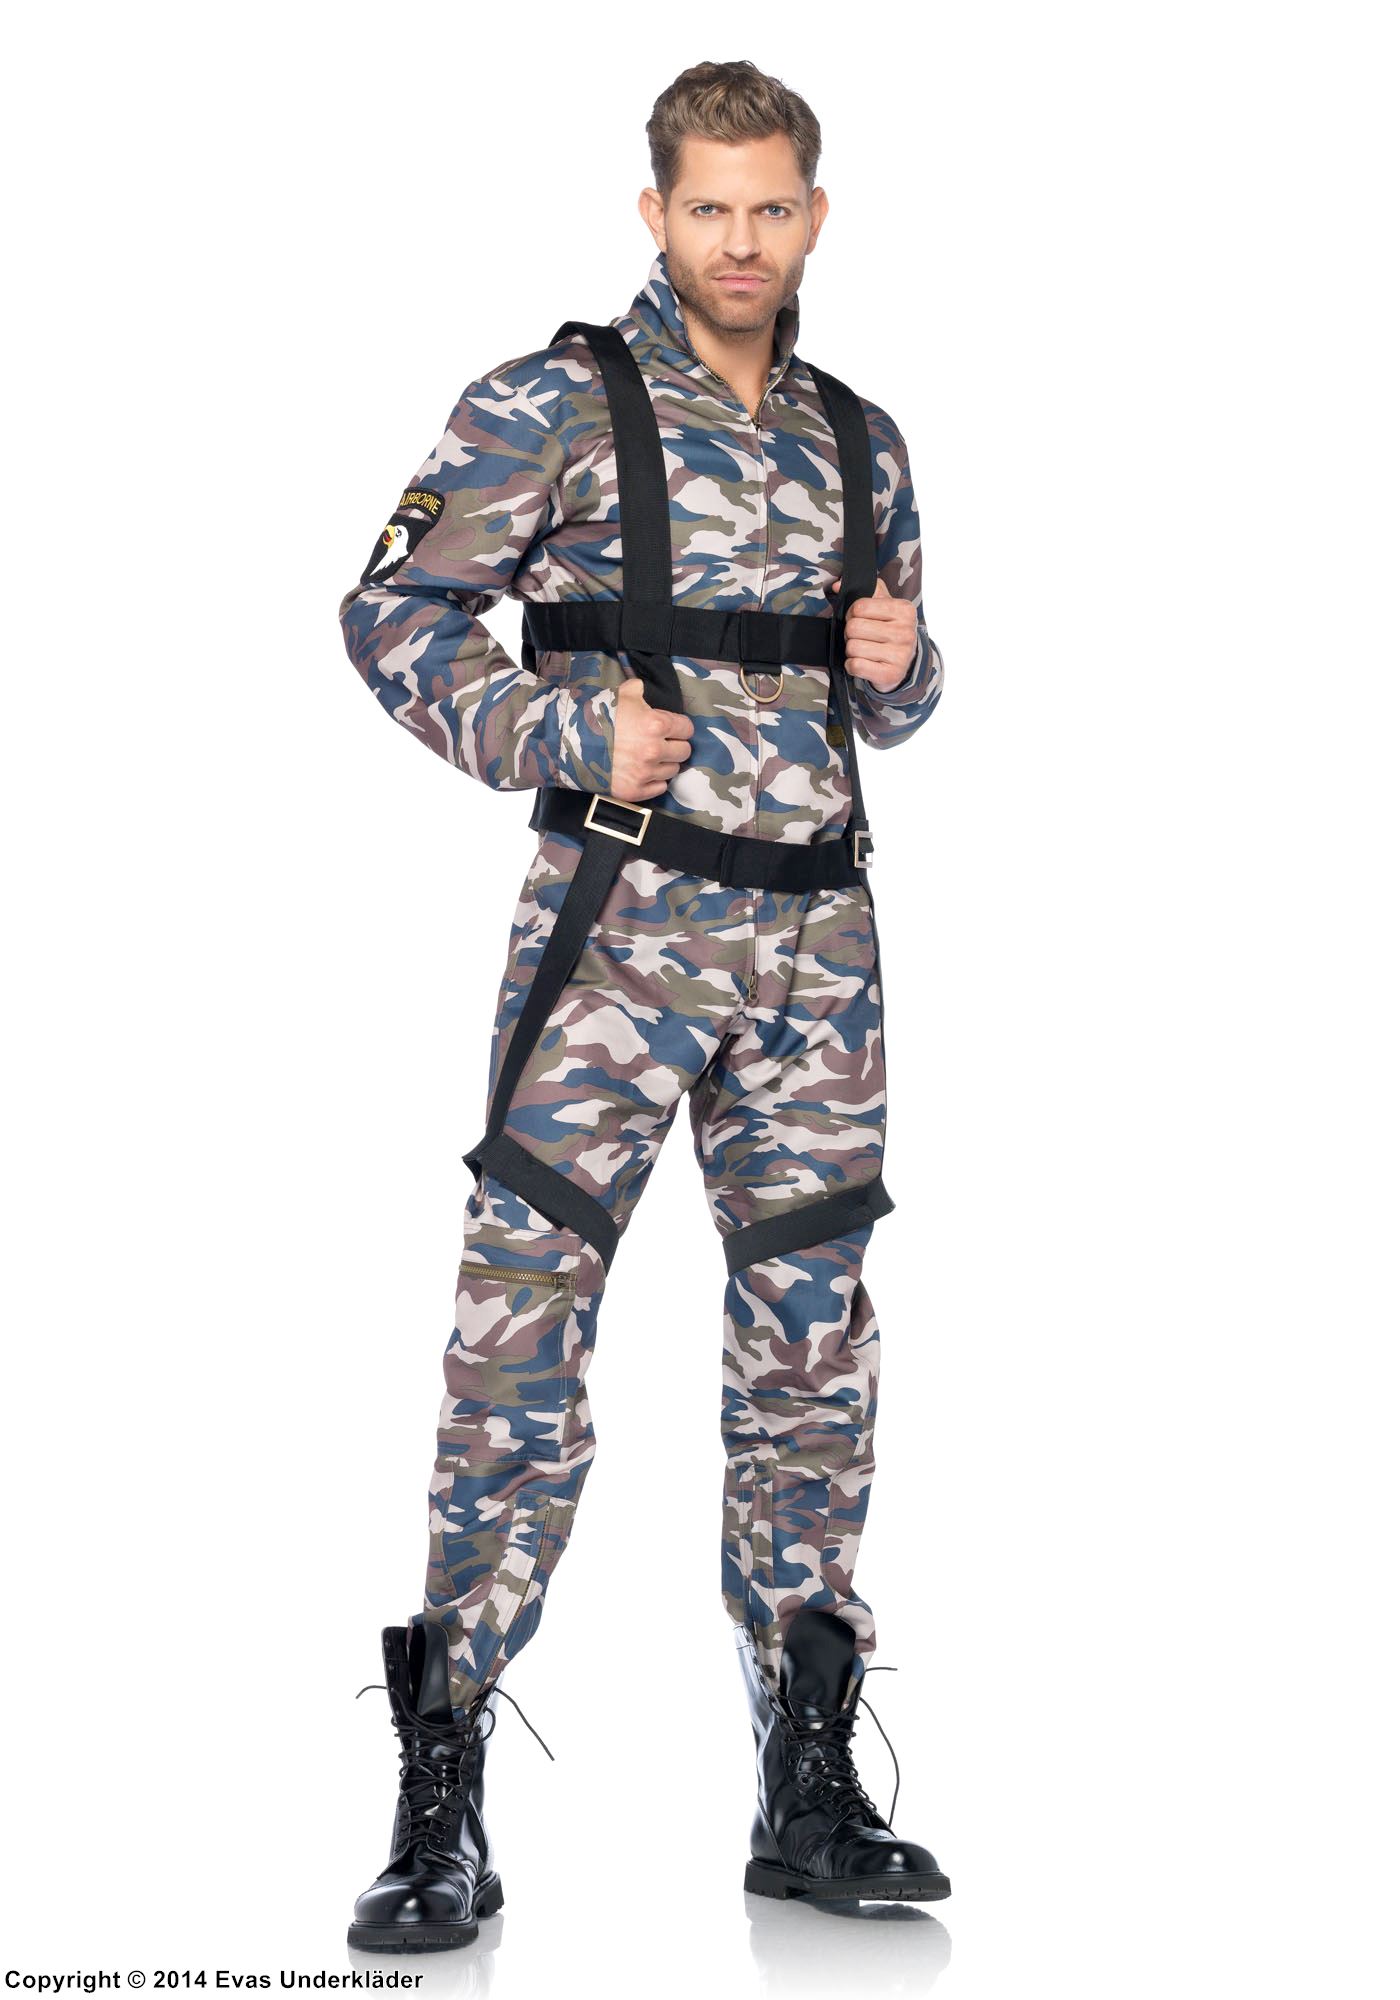 Paratrooper, jumpsuit costume, long sleeves, front zipper, camouflage